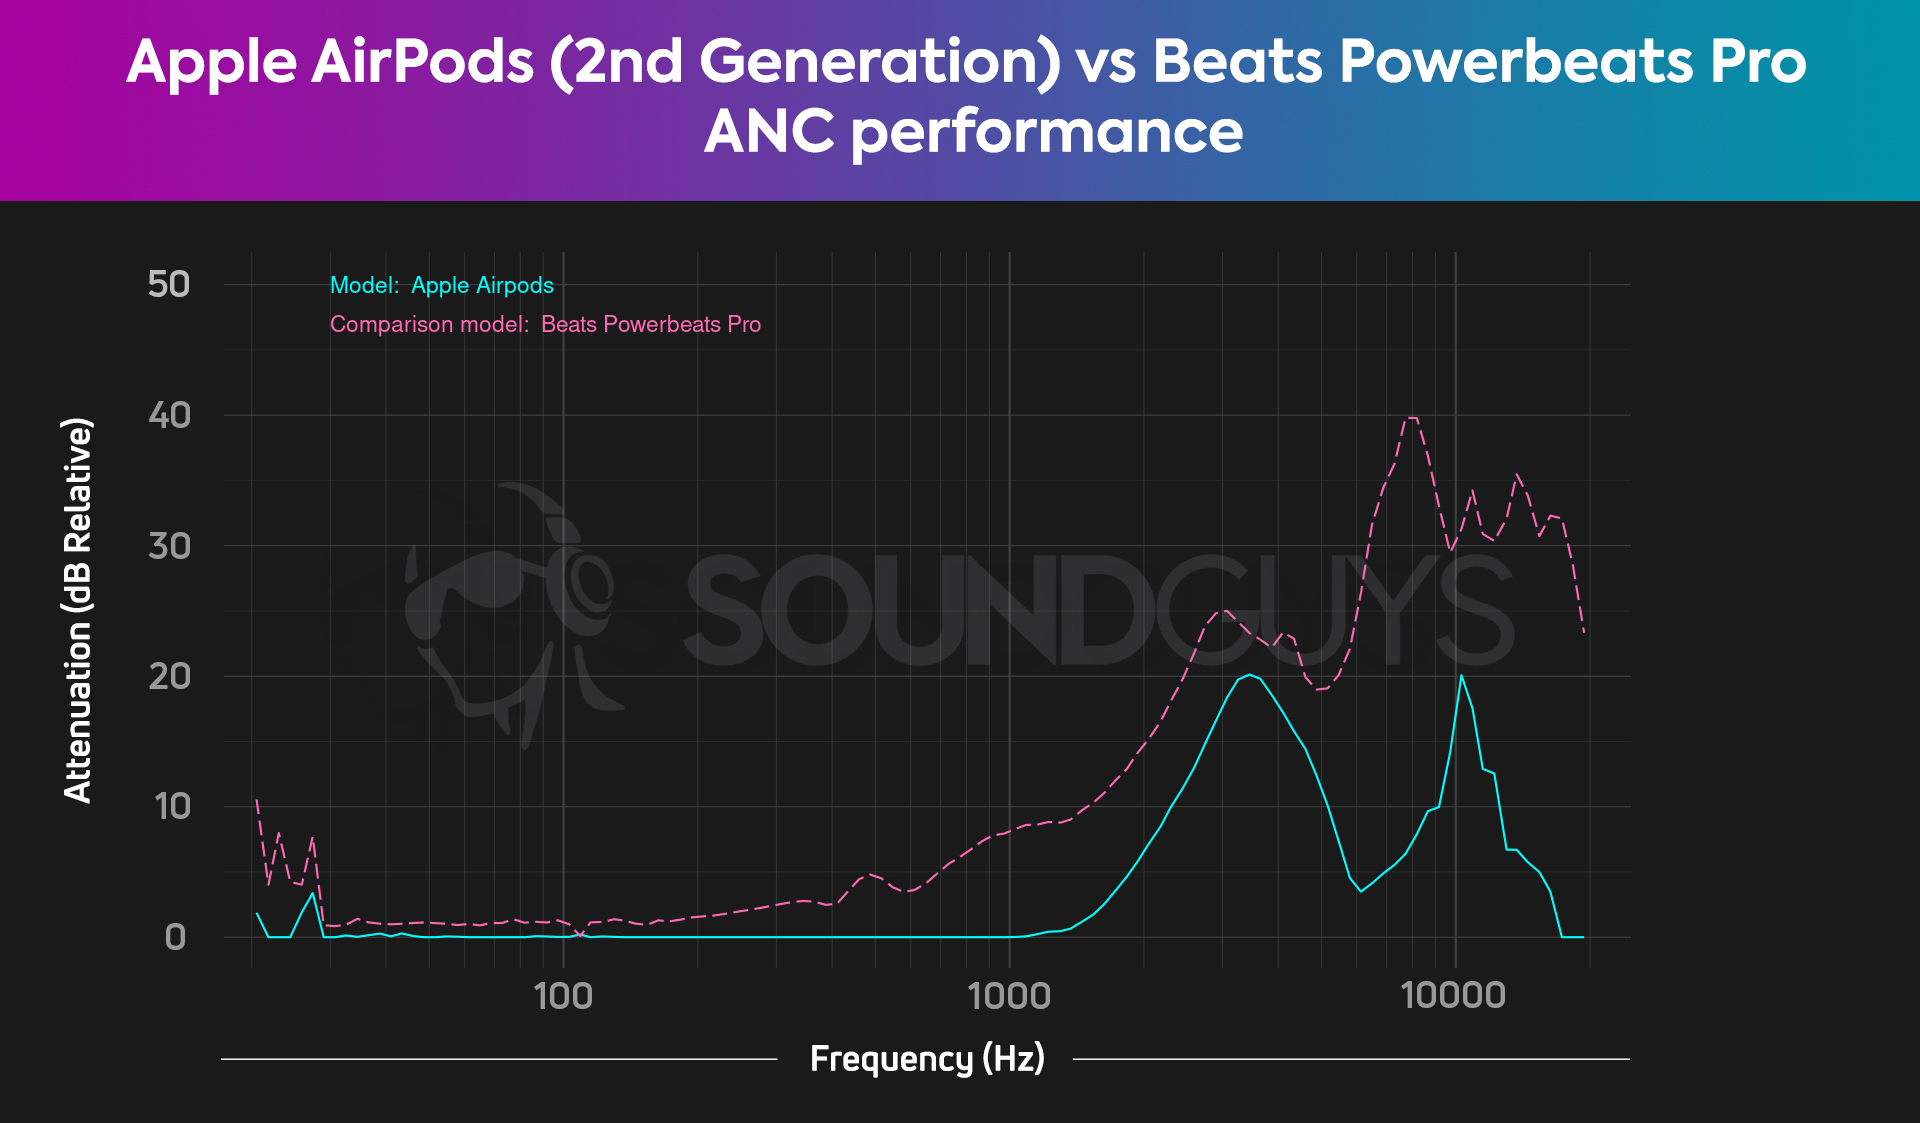 Apple AirPods (2nd gen) vs Beats Powerbeats Pro isolation chart. The Beats Powerbeats Pro is more effective at isolating sound than the AirPods (2nd gen).